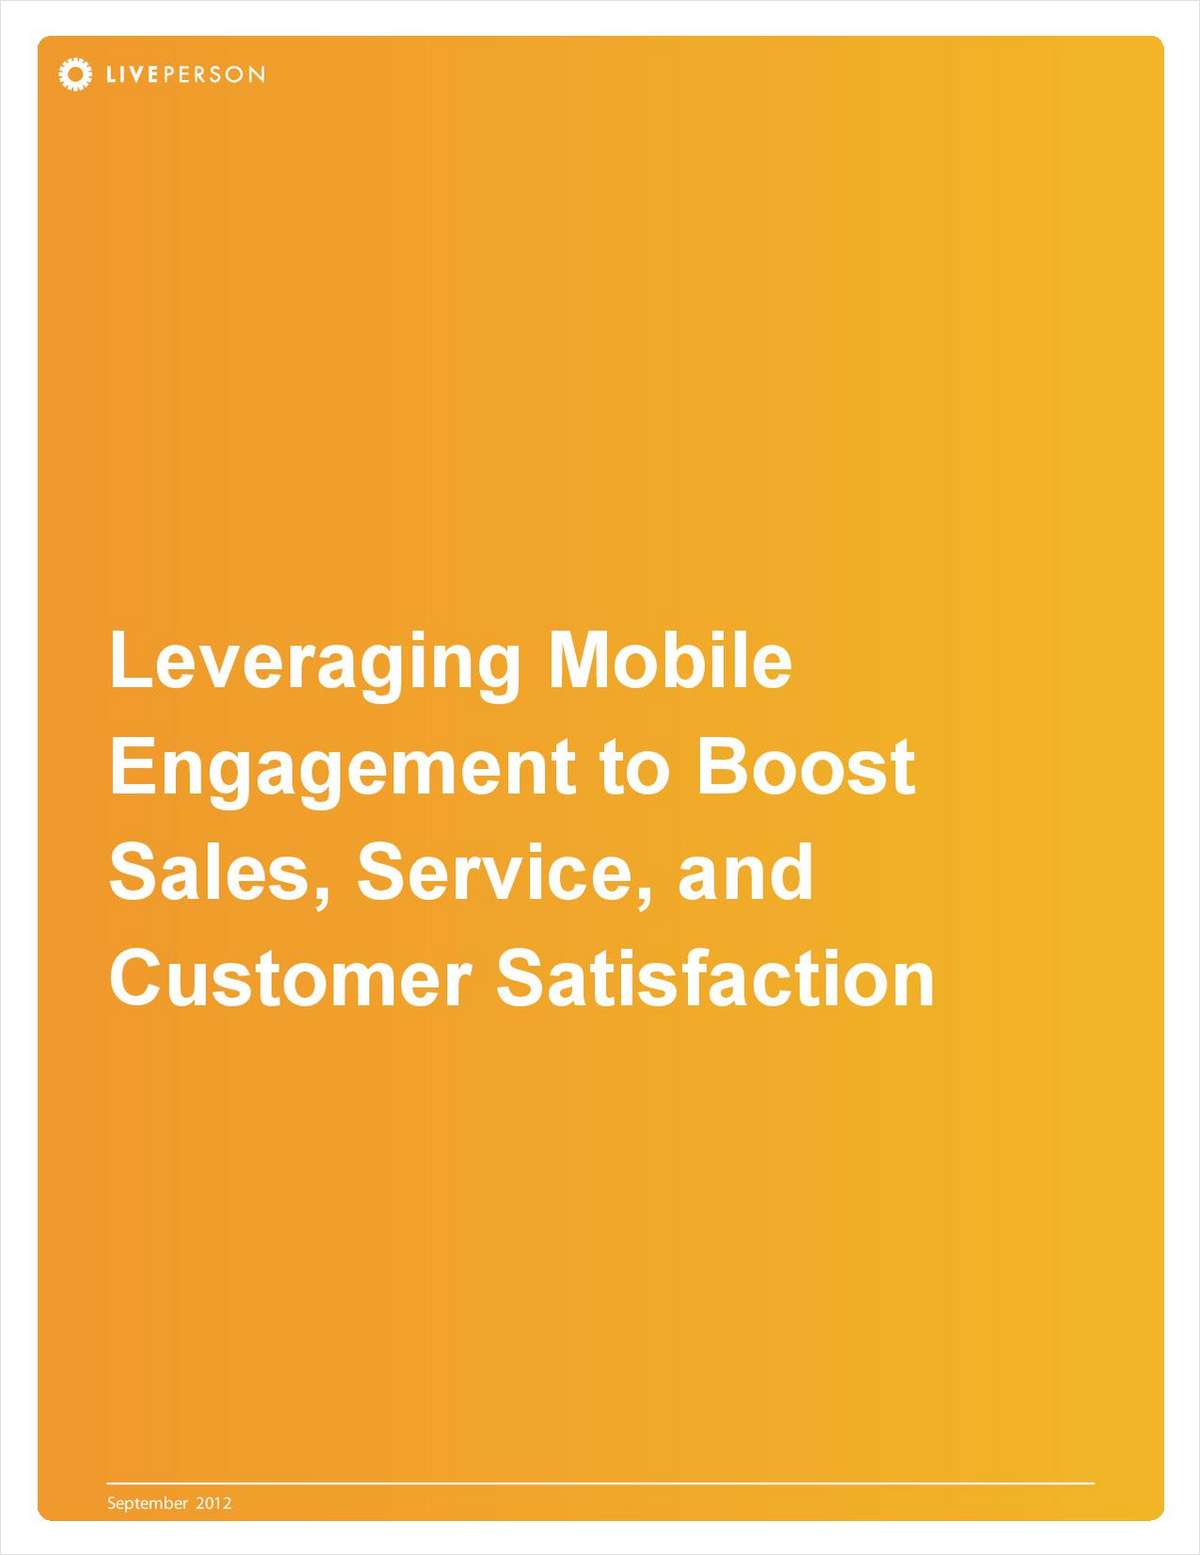 Leveraging Mobile Engagement to Boost Sales, Service, and Customer Satisfaction